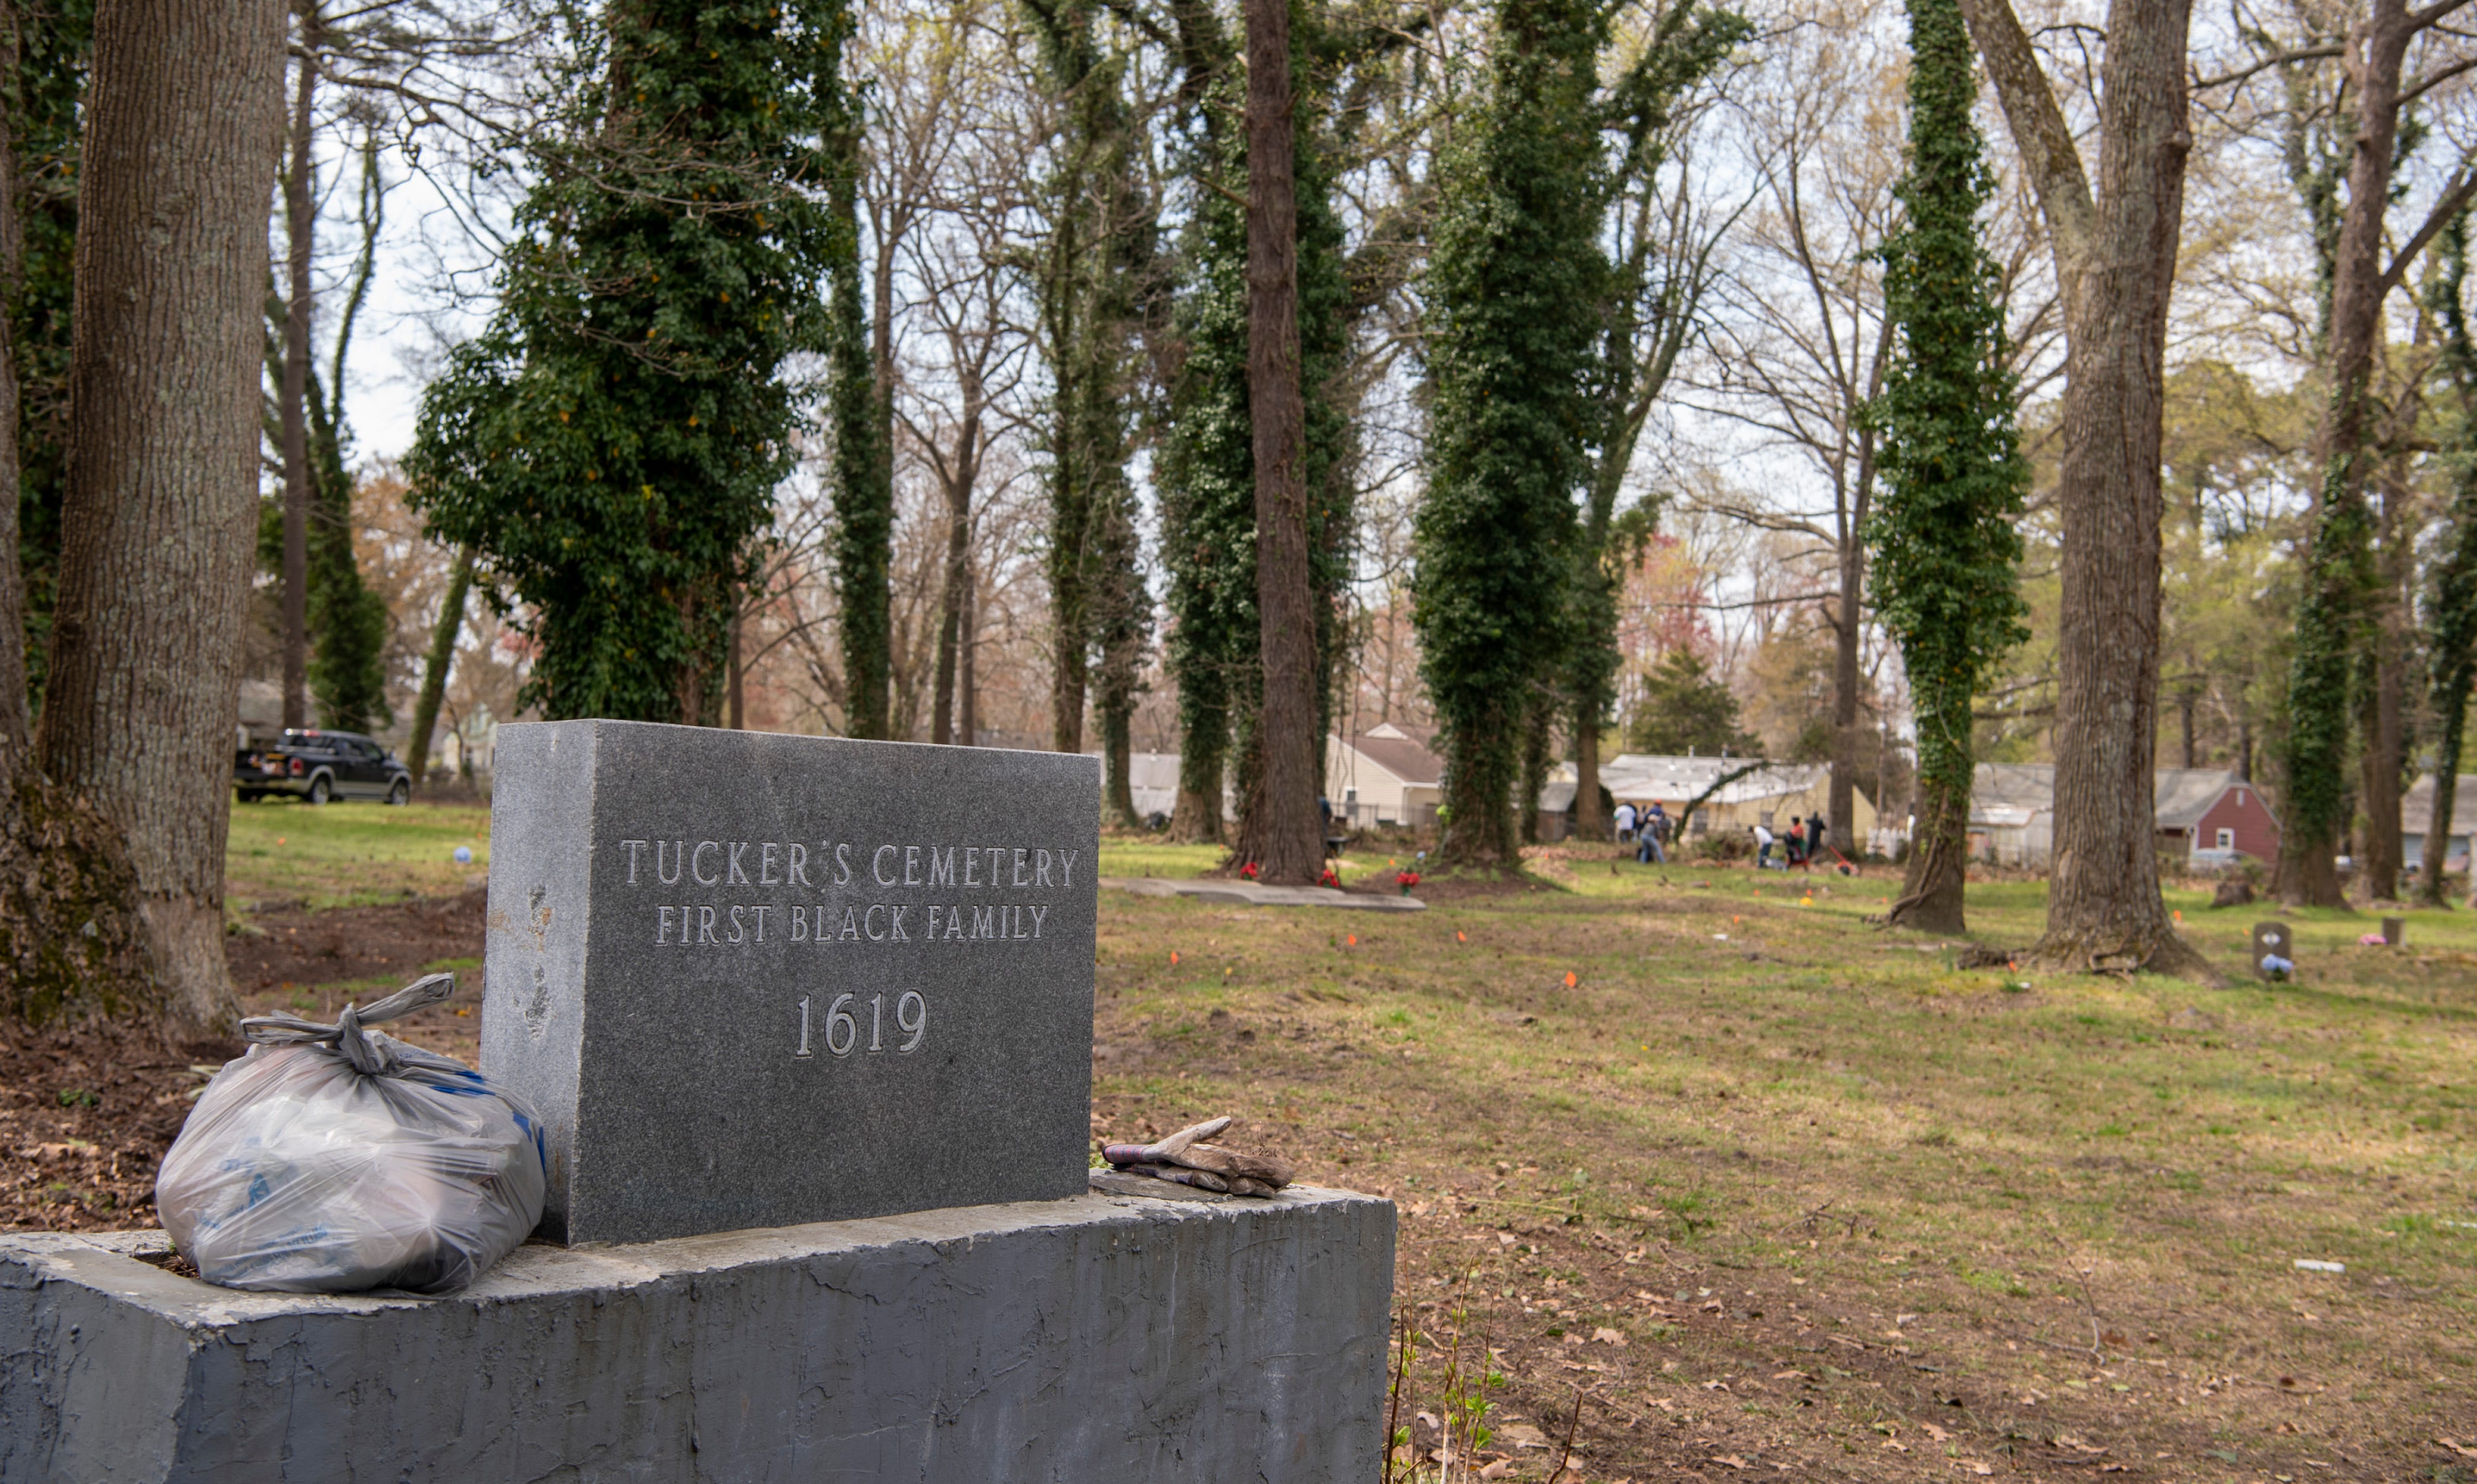 Volunteers help clean up debris during the family's volunteer cleanup efforts at the Tucker Family Cemetery in Hampton, Va. on Saturday, March 30, 2019.